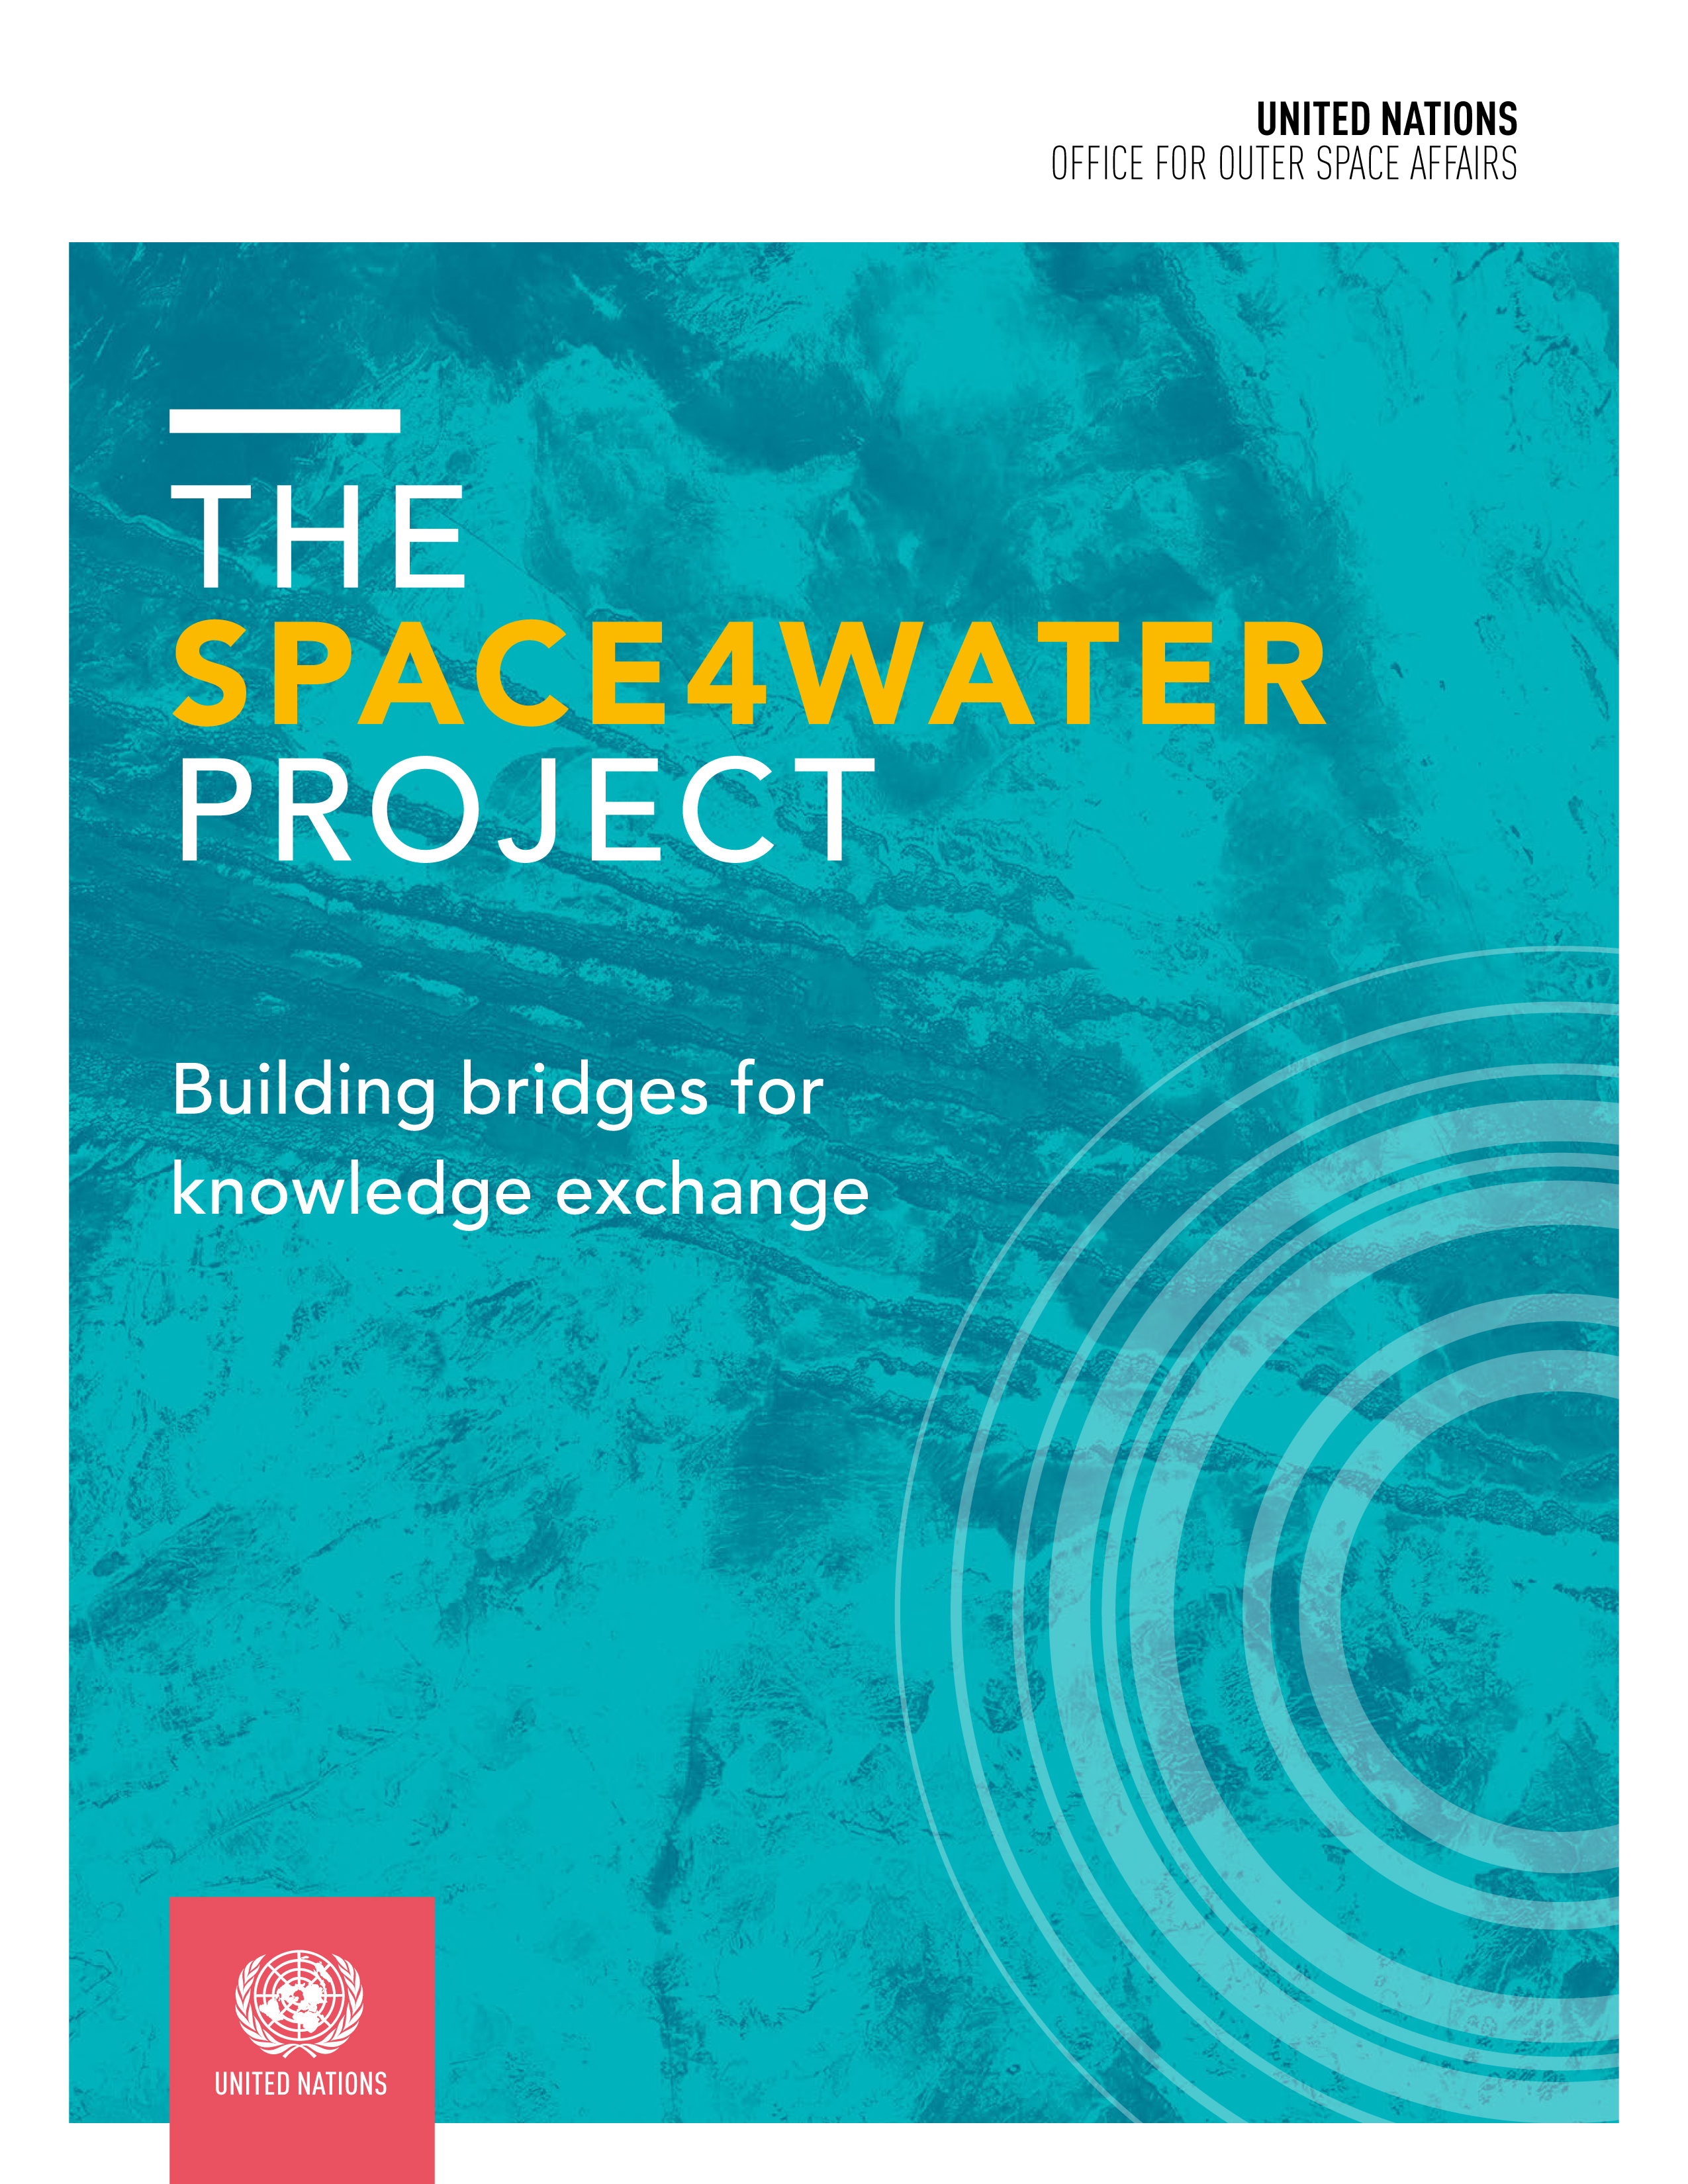 The Space4water Project: Building Bridges for Knowledge Exchange